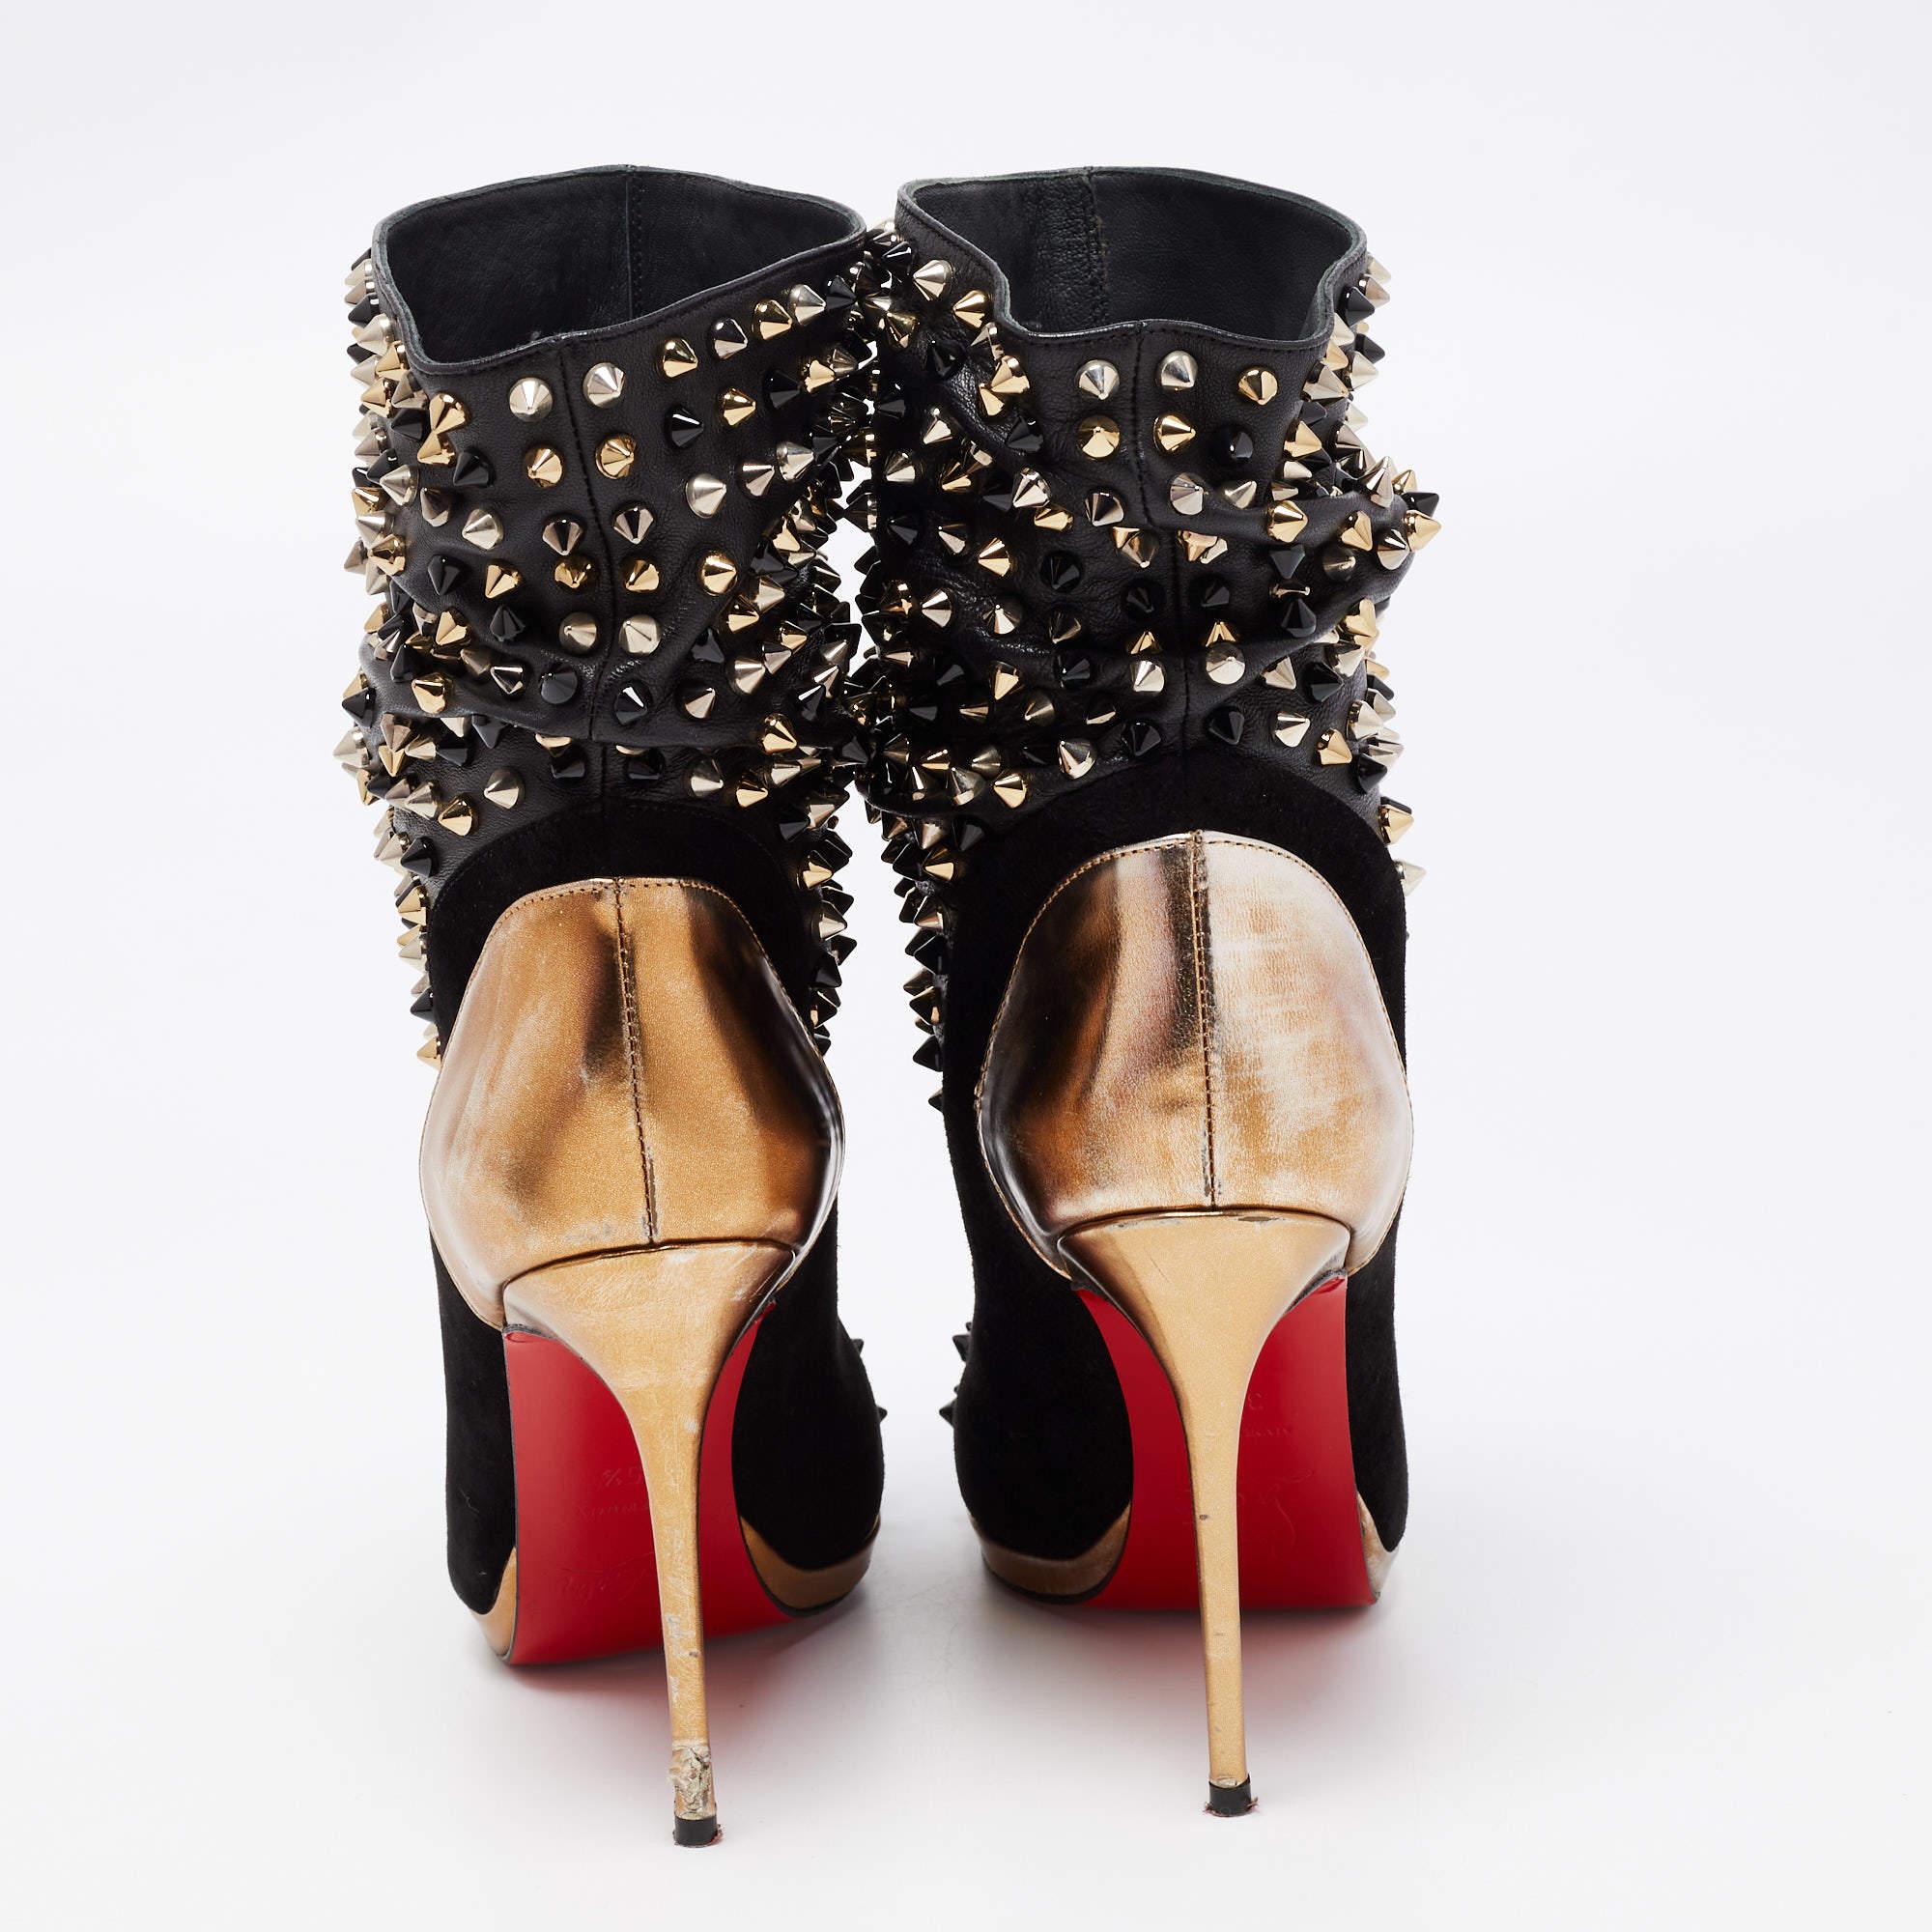 Christian Louboutin Black/Gold Suede, Patent Spike Wars Ankle Booties Size 35.5 In Good Condition For Sale In Dubai, Al Qouz 2